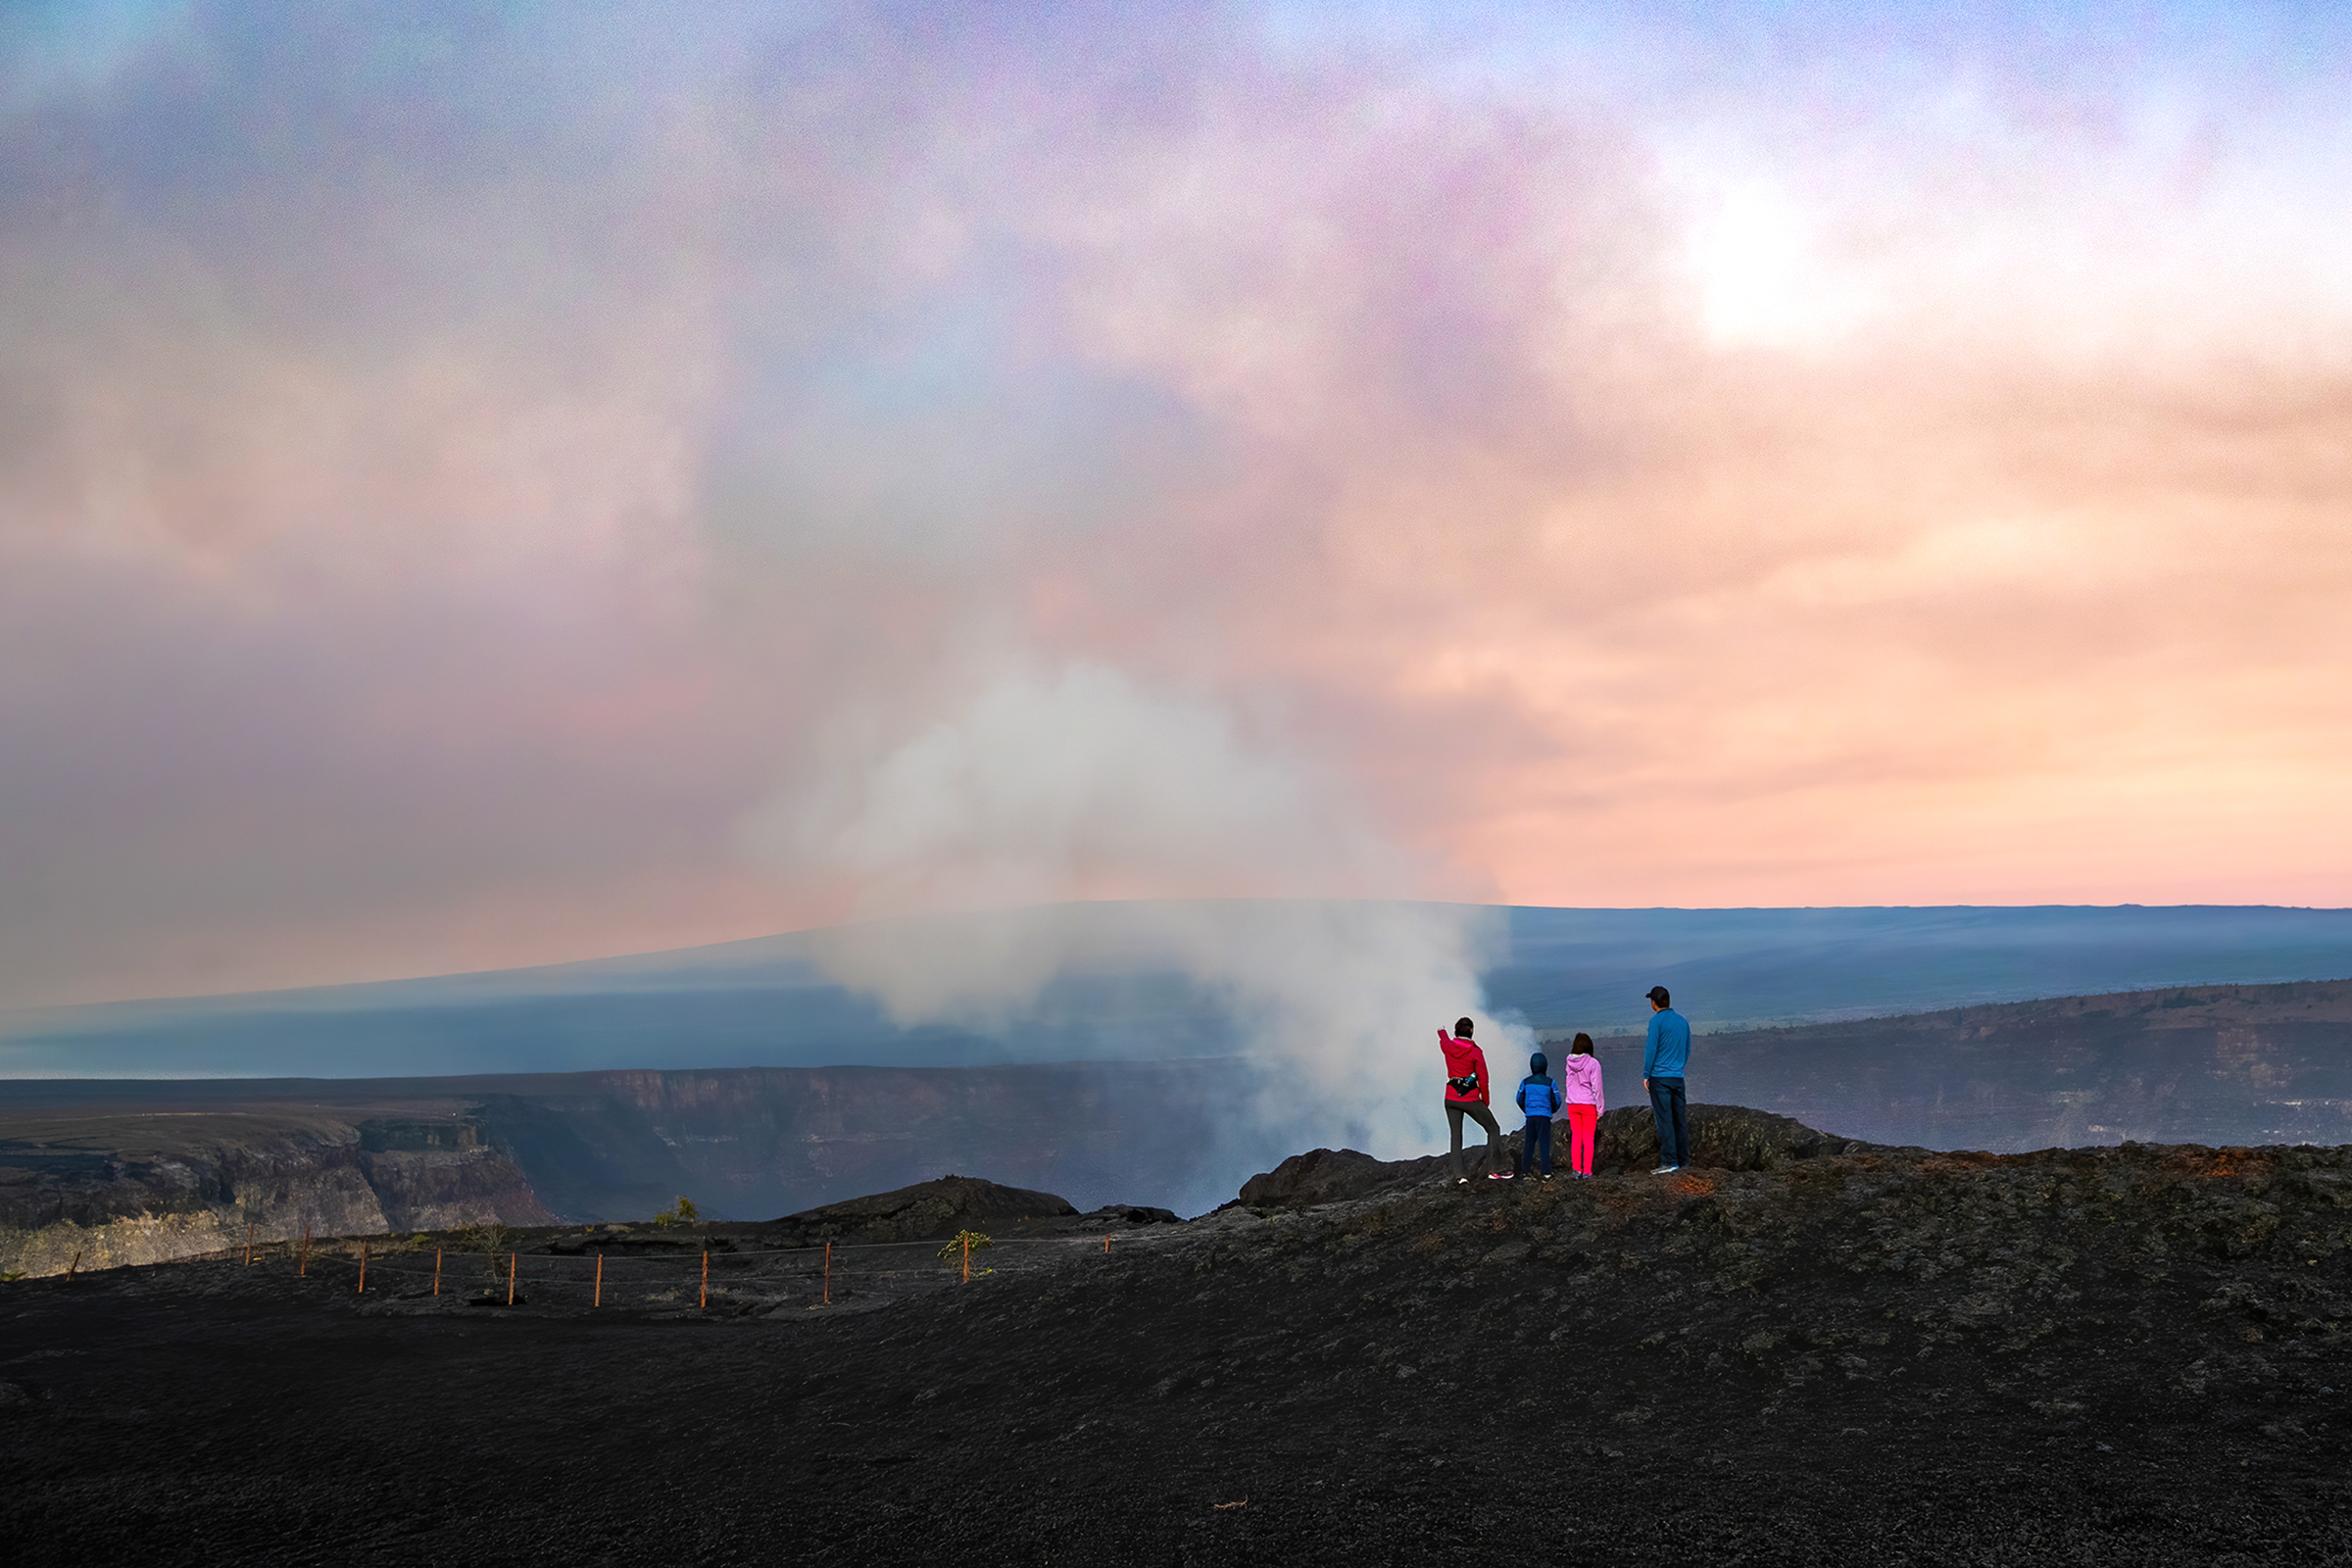 Family at a viewpoint overlooking a steaming volcanic crater at sunrise